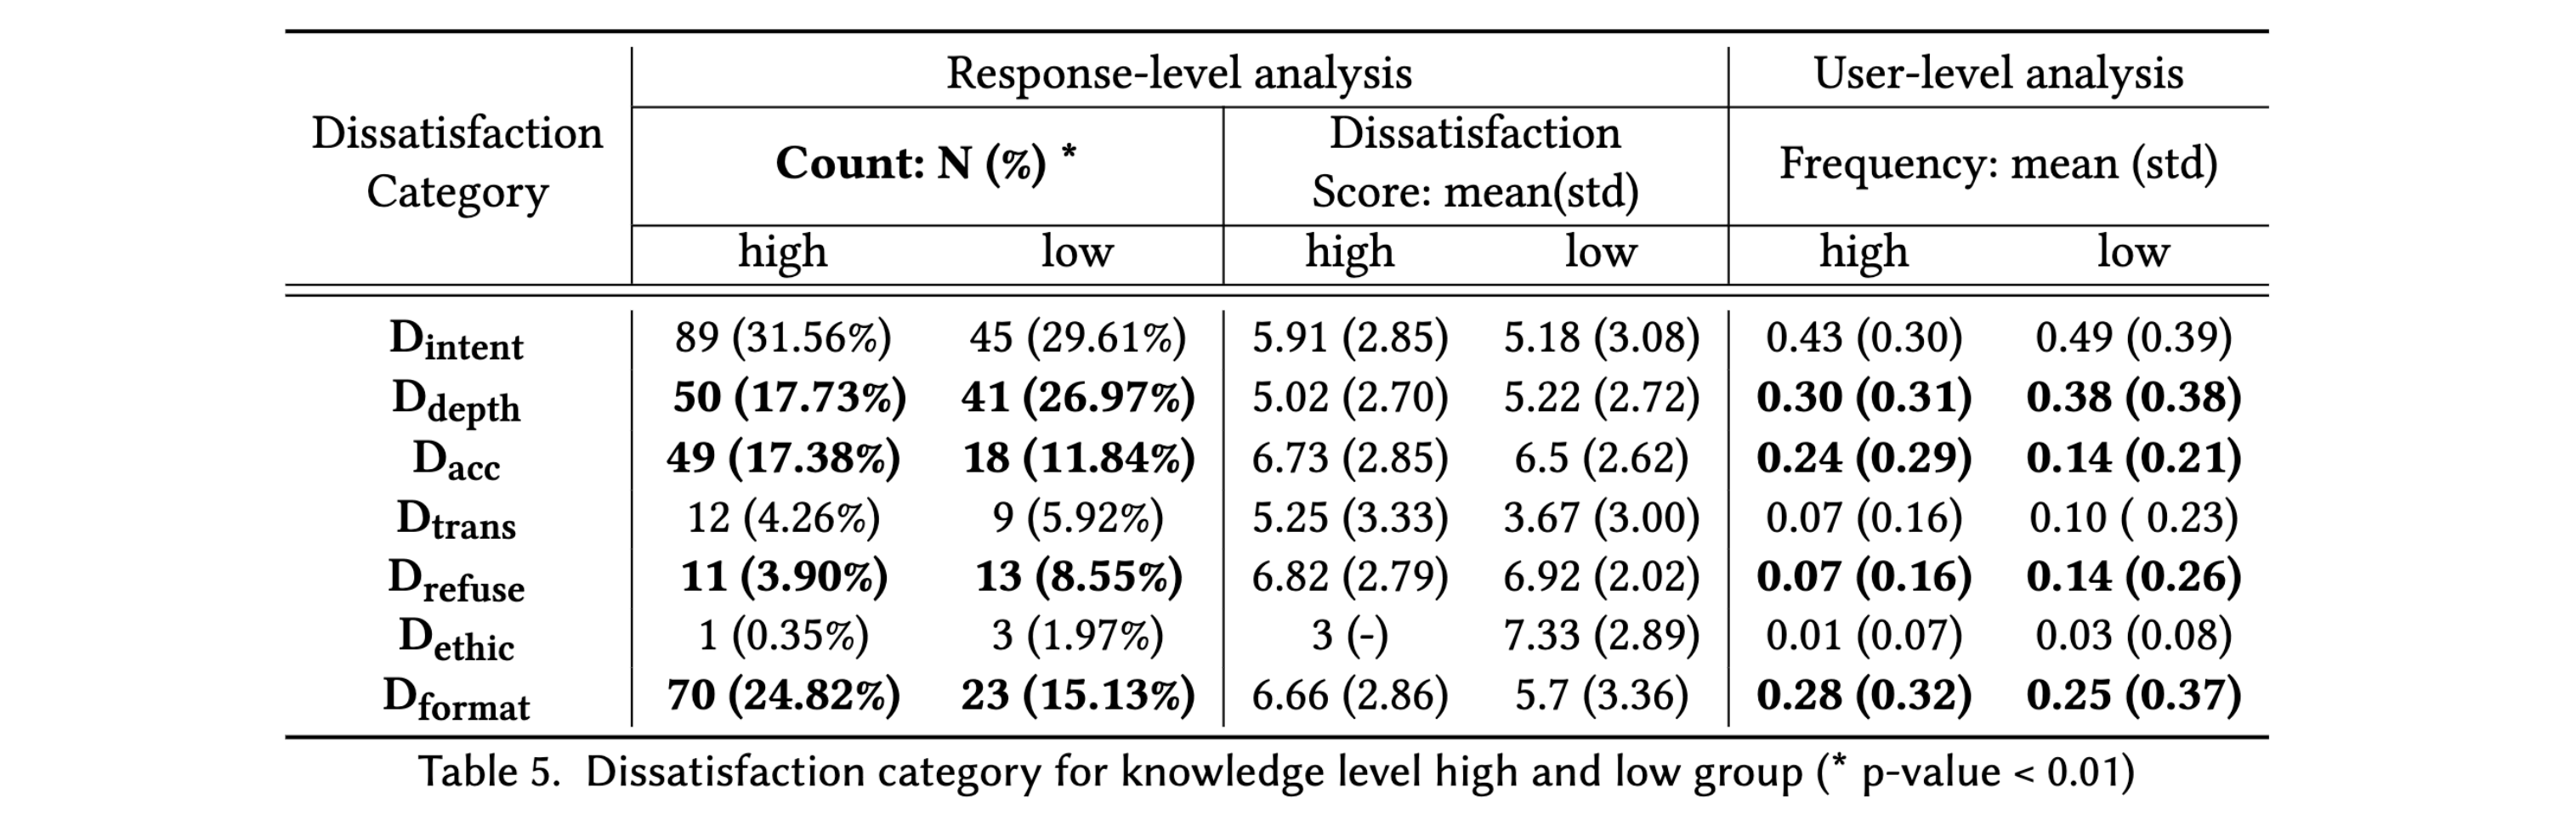 Dissatisfaction analysis by knowledge group